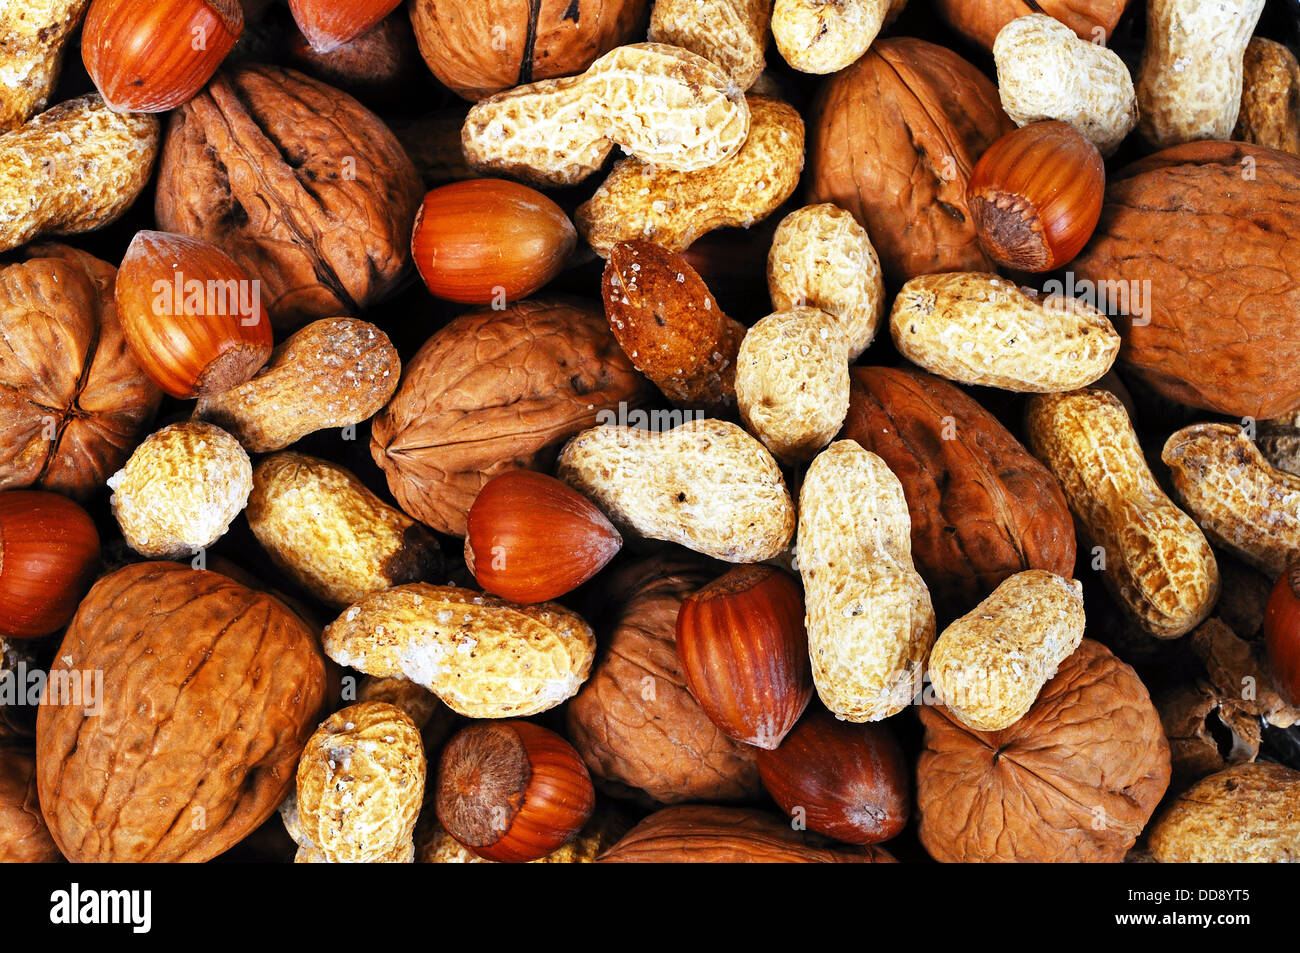 Mixed nuts in their shells (Monkey nuts, Walnuts and Hazelnuts). Stock Photo